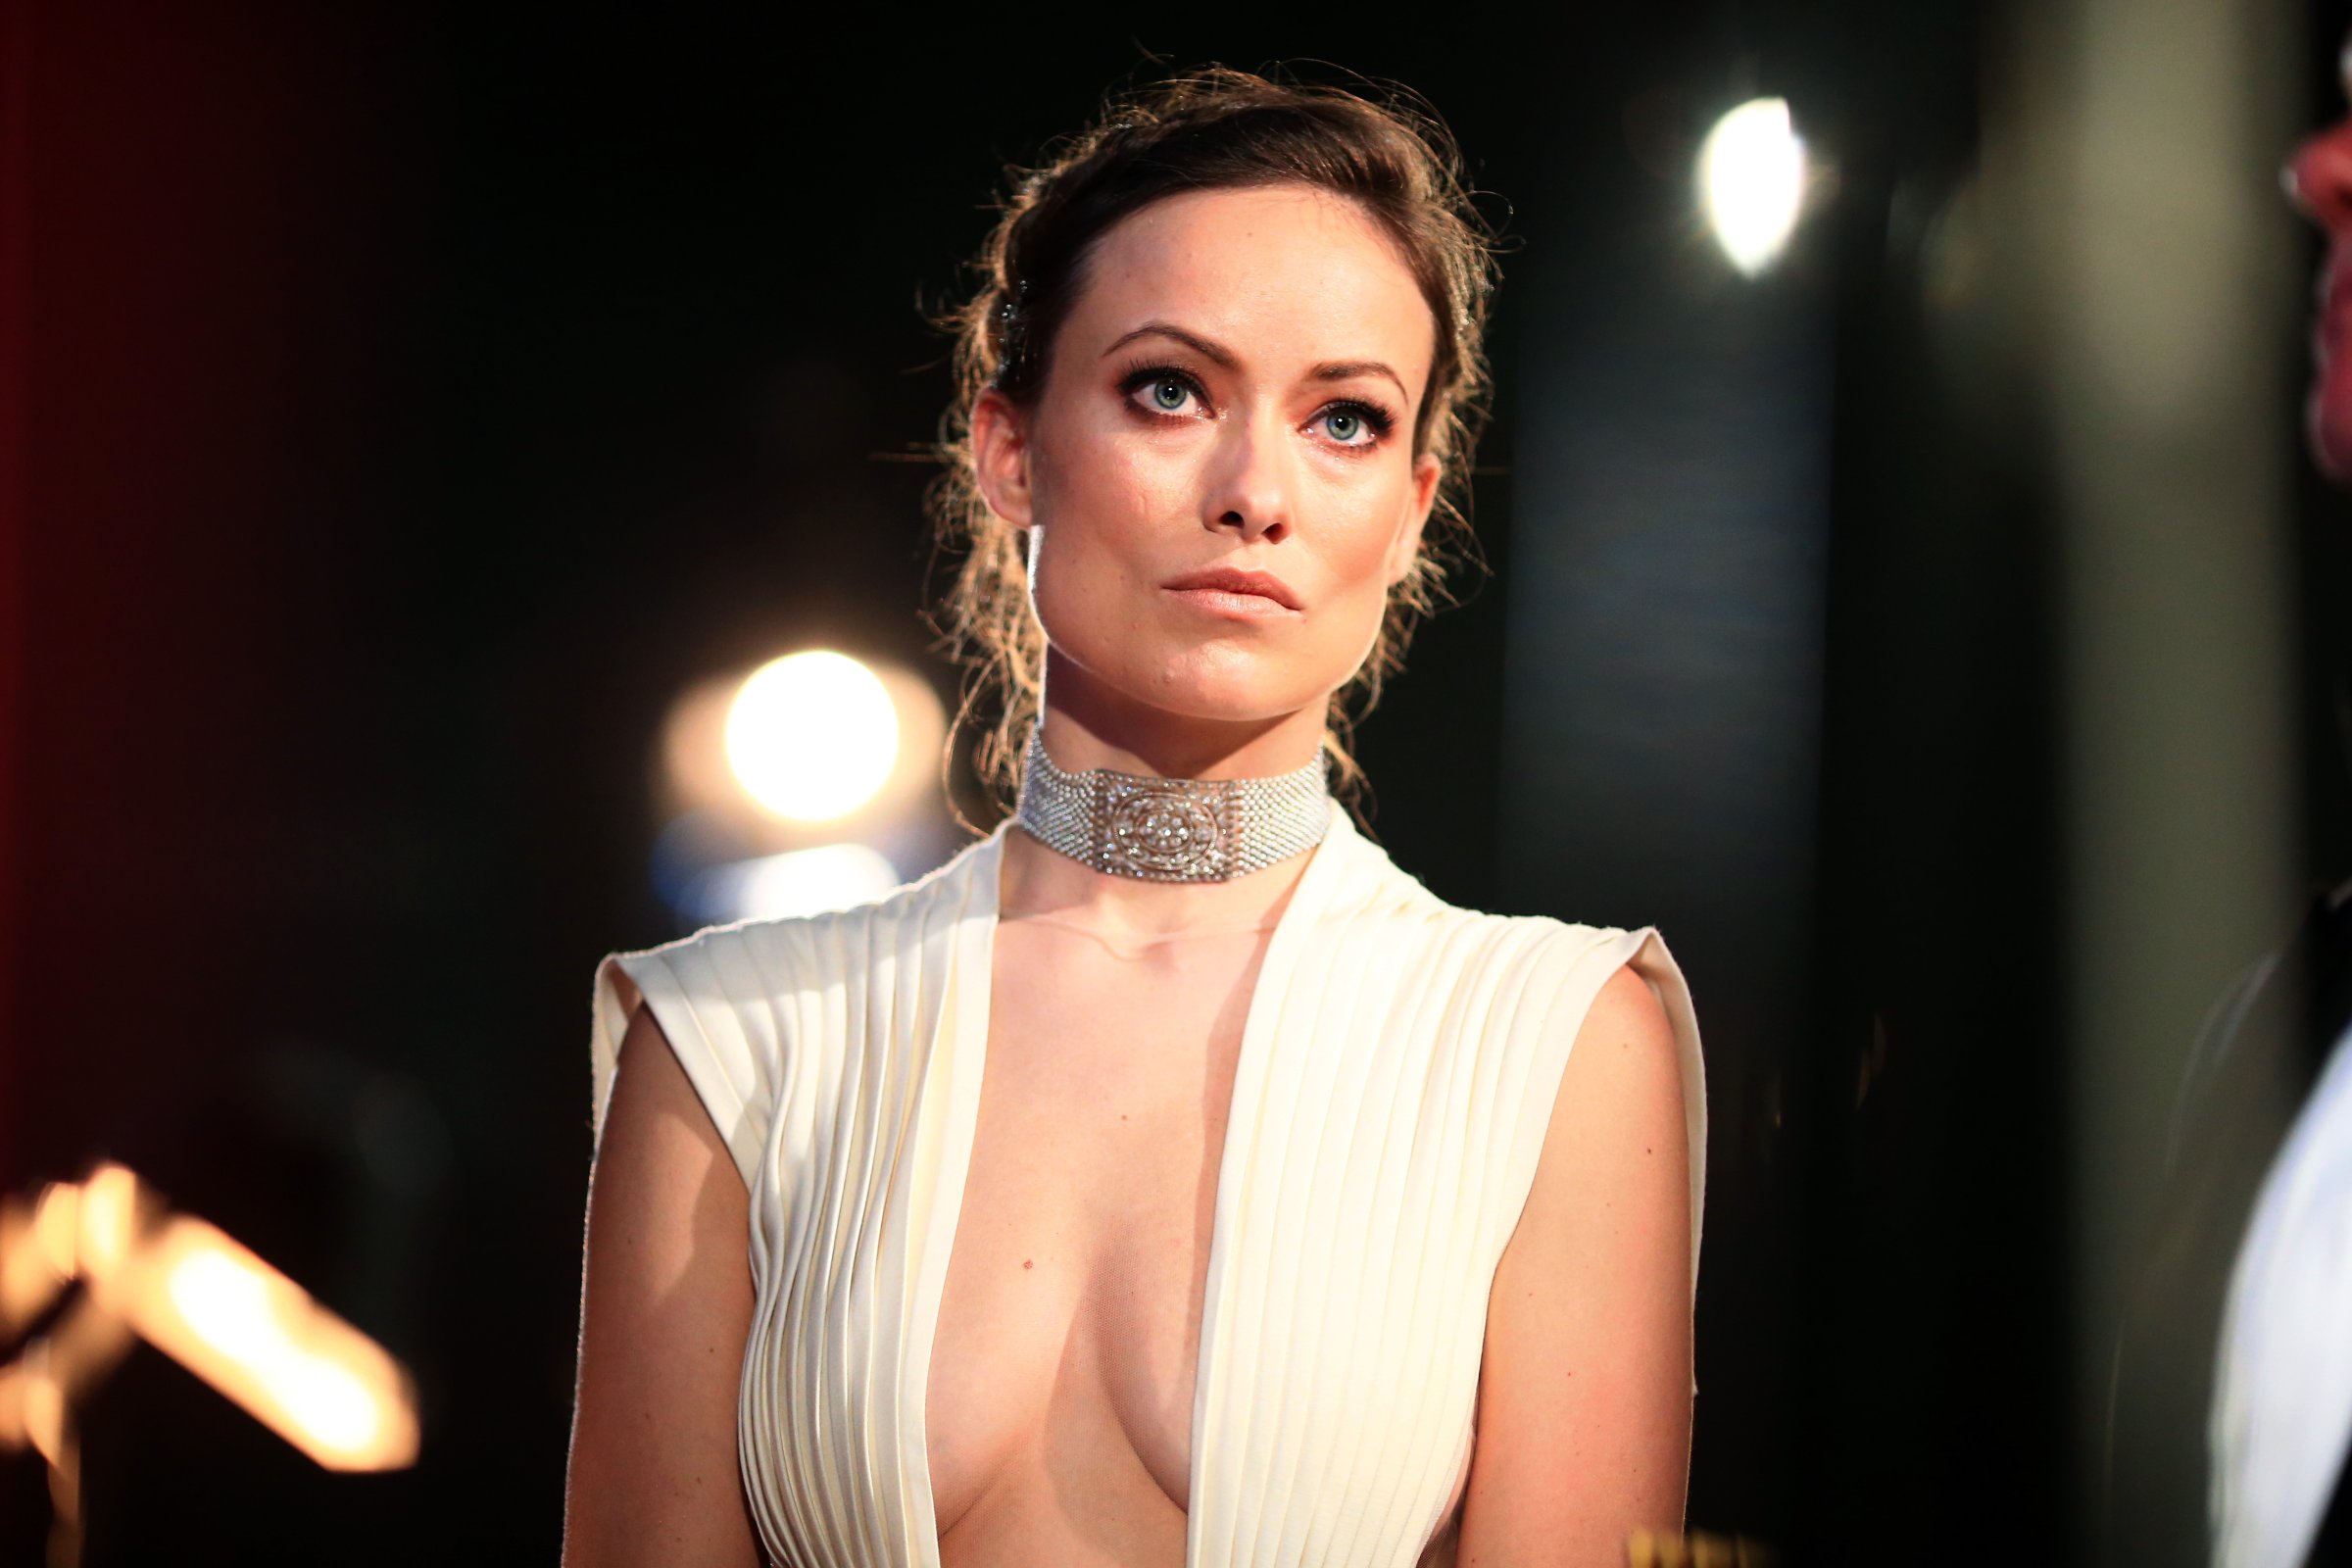 Olivia Wilde attends the 88th Annual Academy Awards at Dolby Theatre on February 28, 2016 in Hollywood, California.